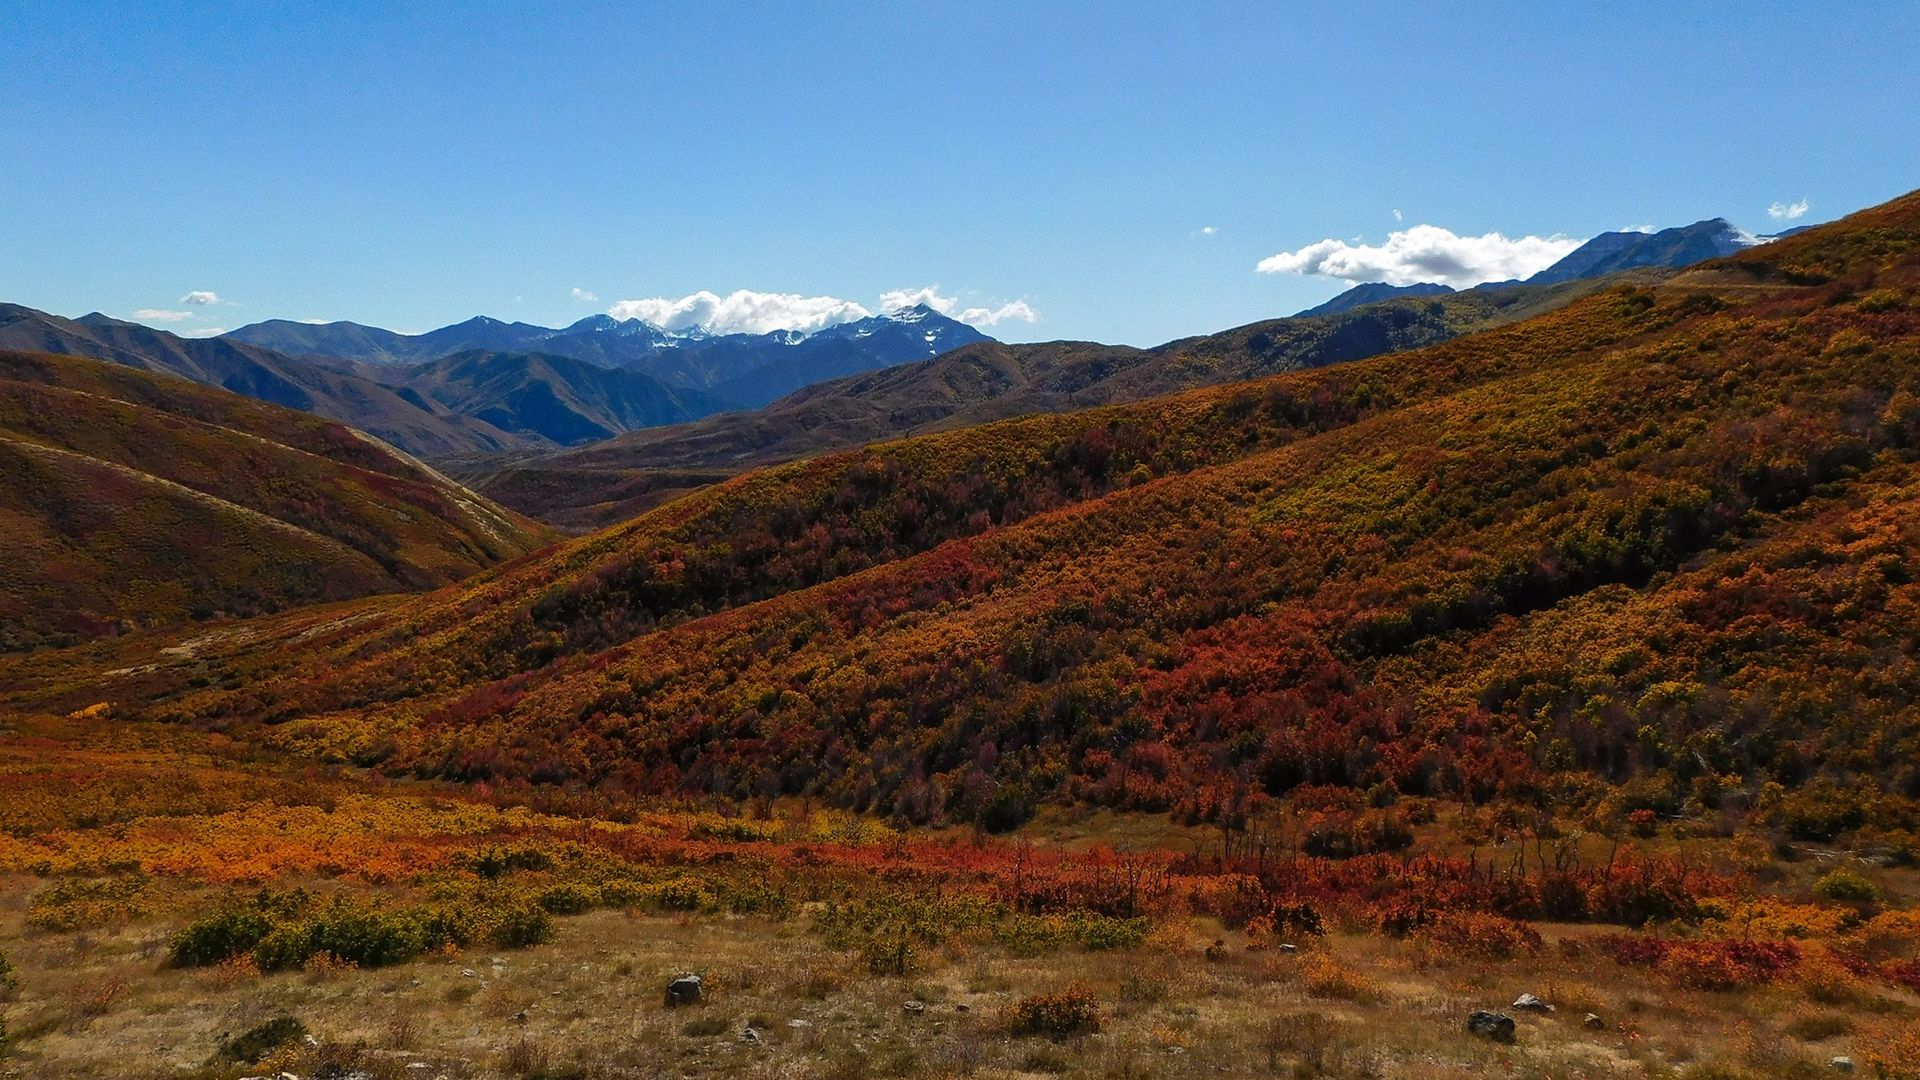 Foliage appears red and orange in foothills backed by snow-capped mountain peaks. 